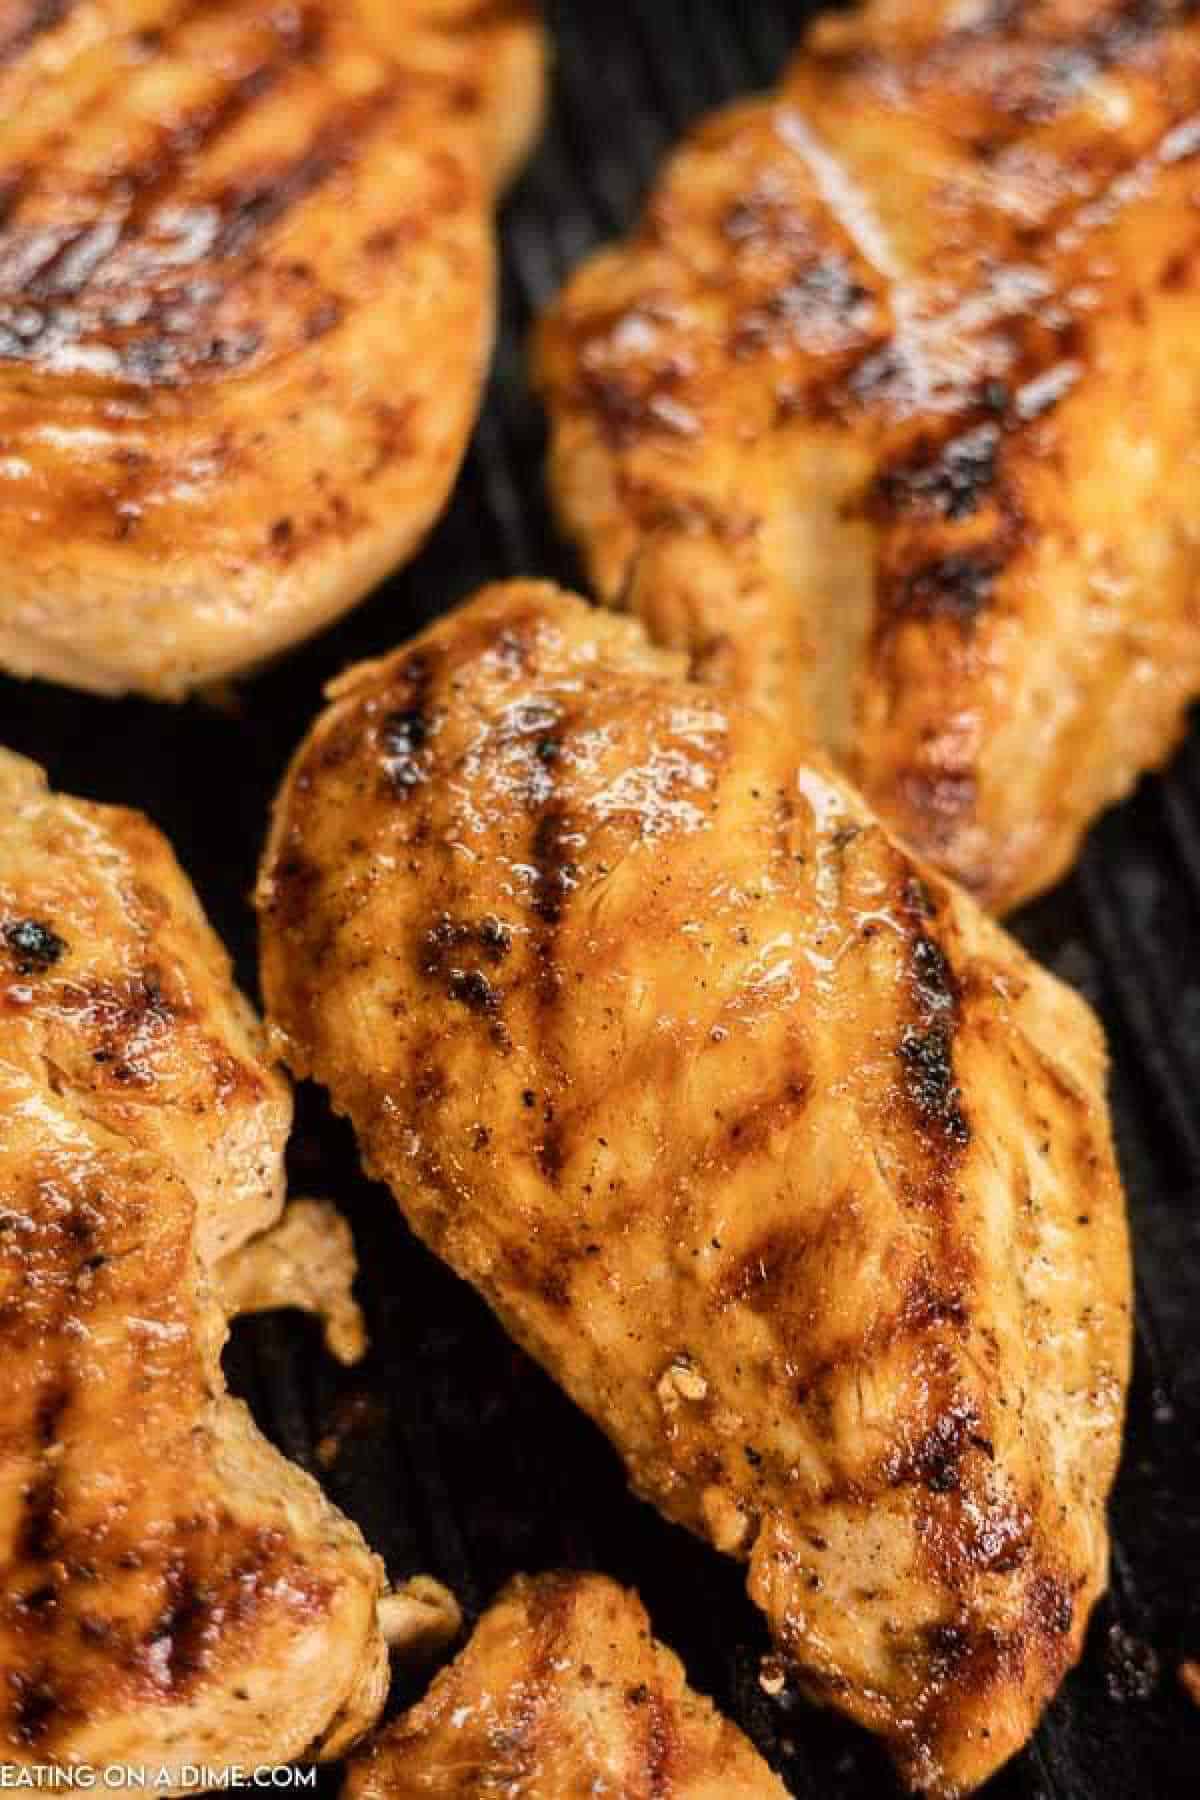 4 chicken breasts on a grill. 